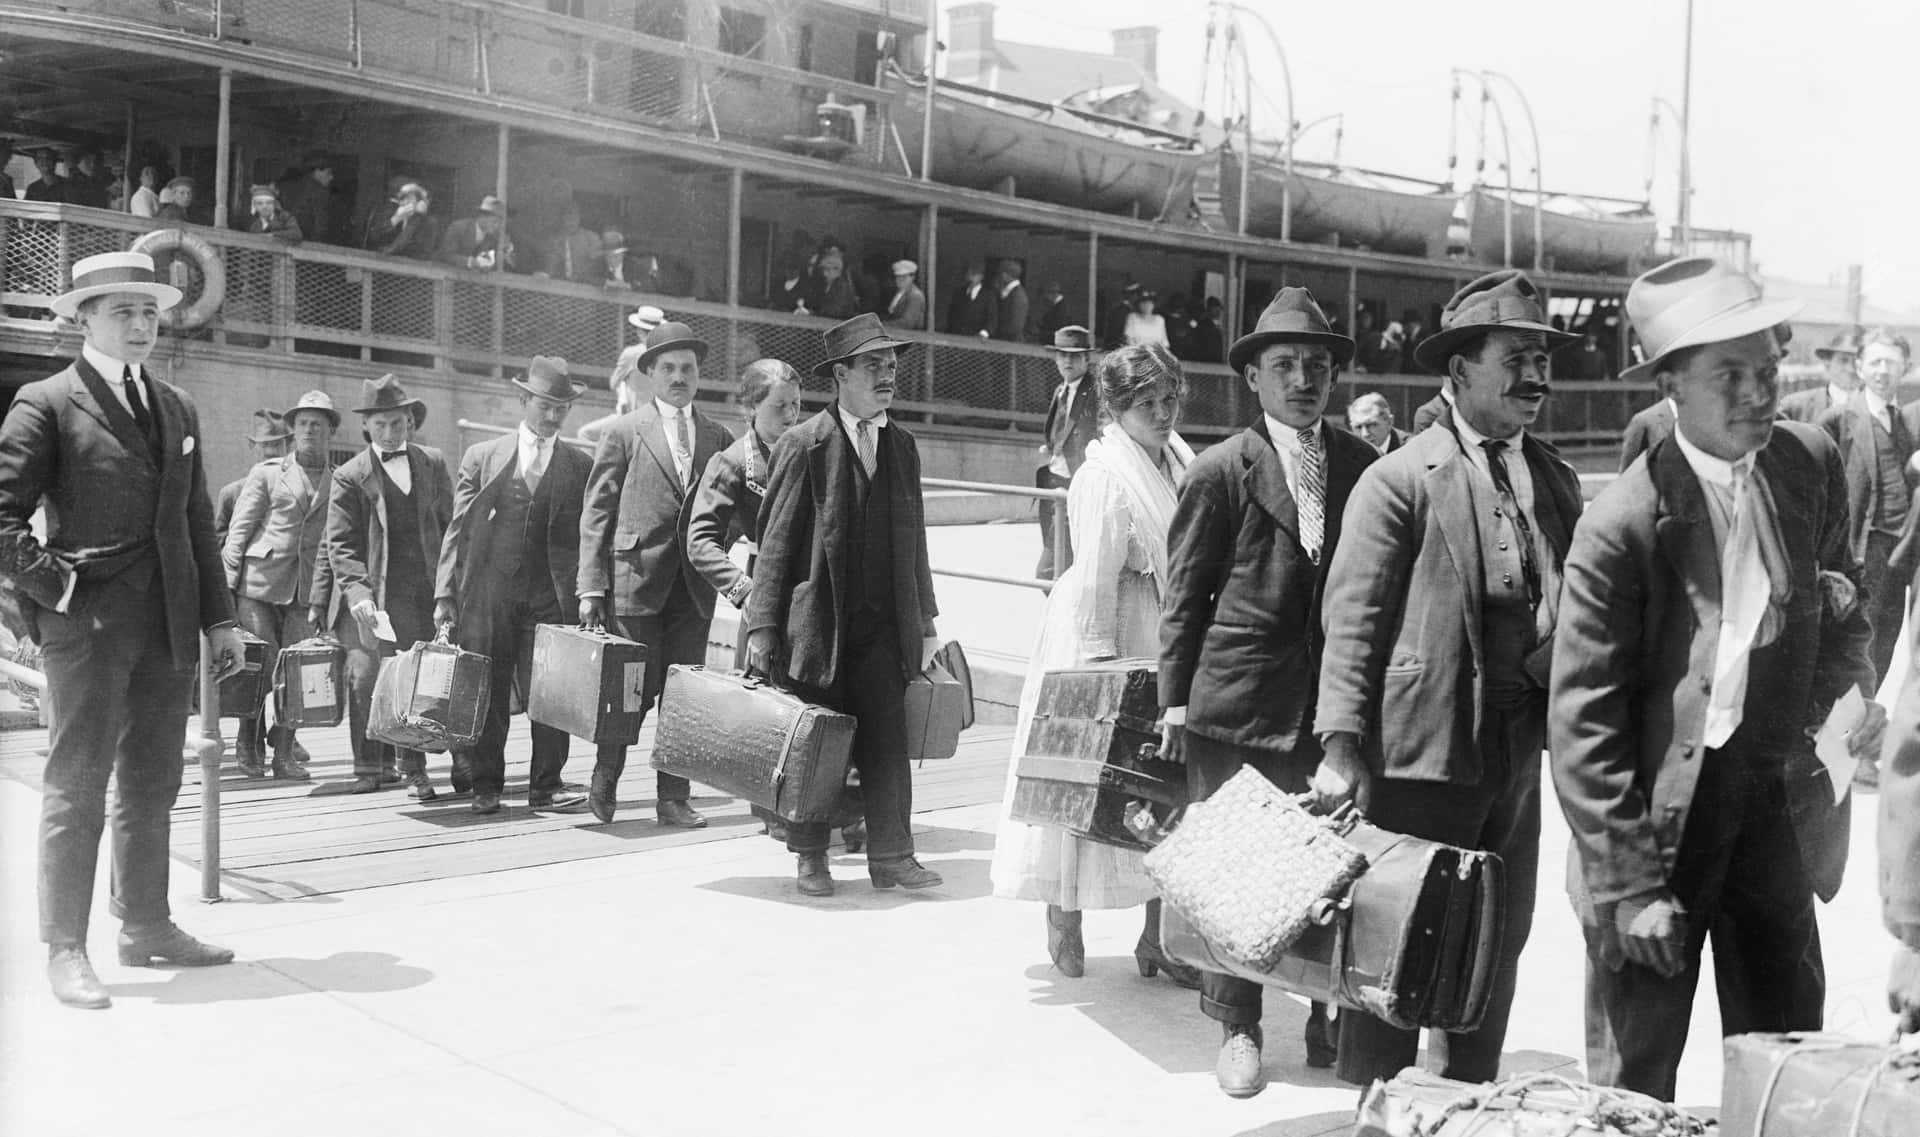 A Group Of People Standing On A Dock With Luggage